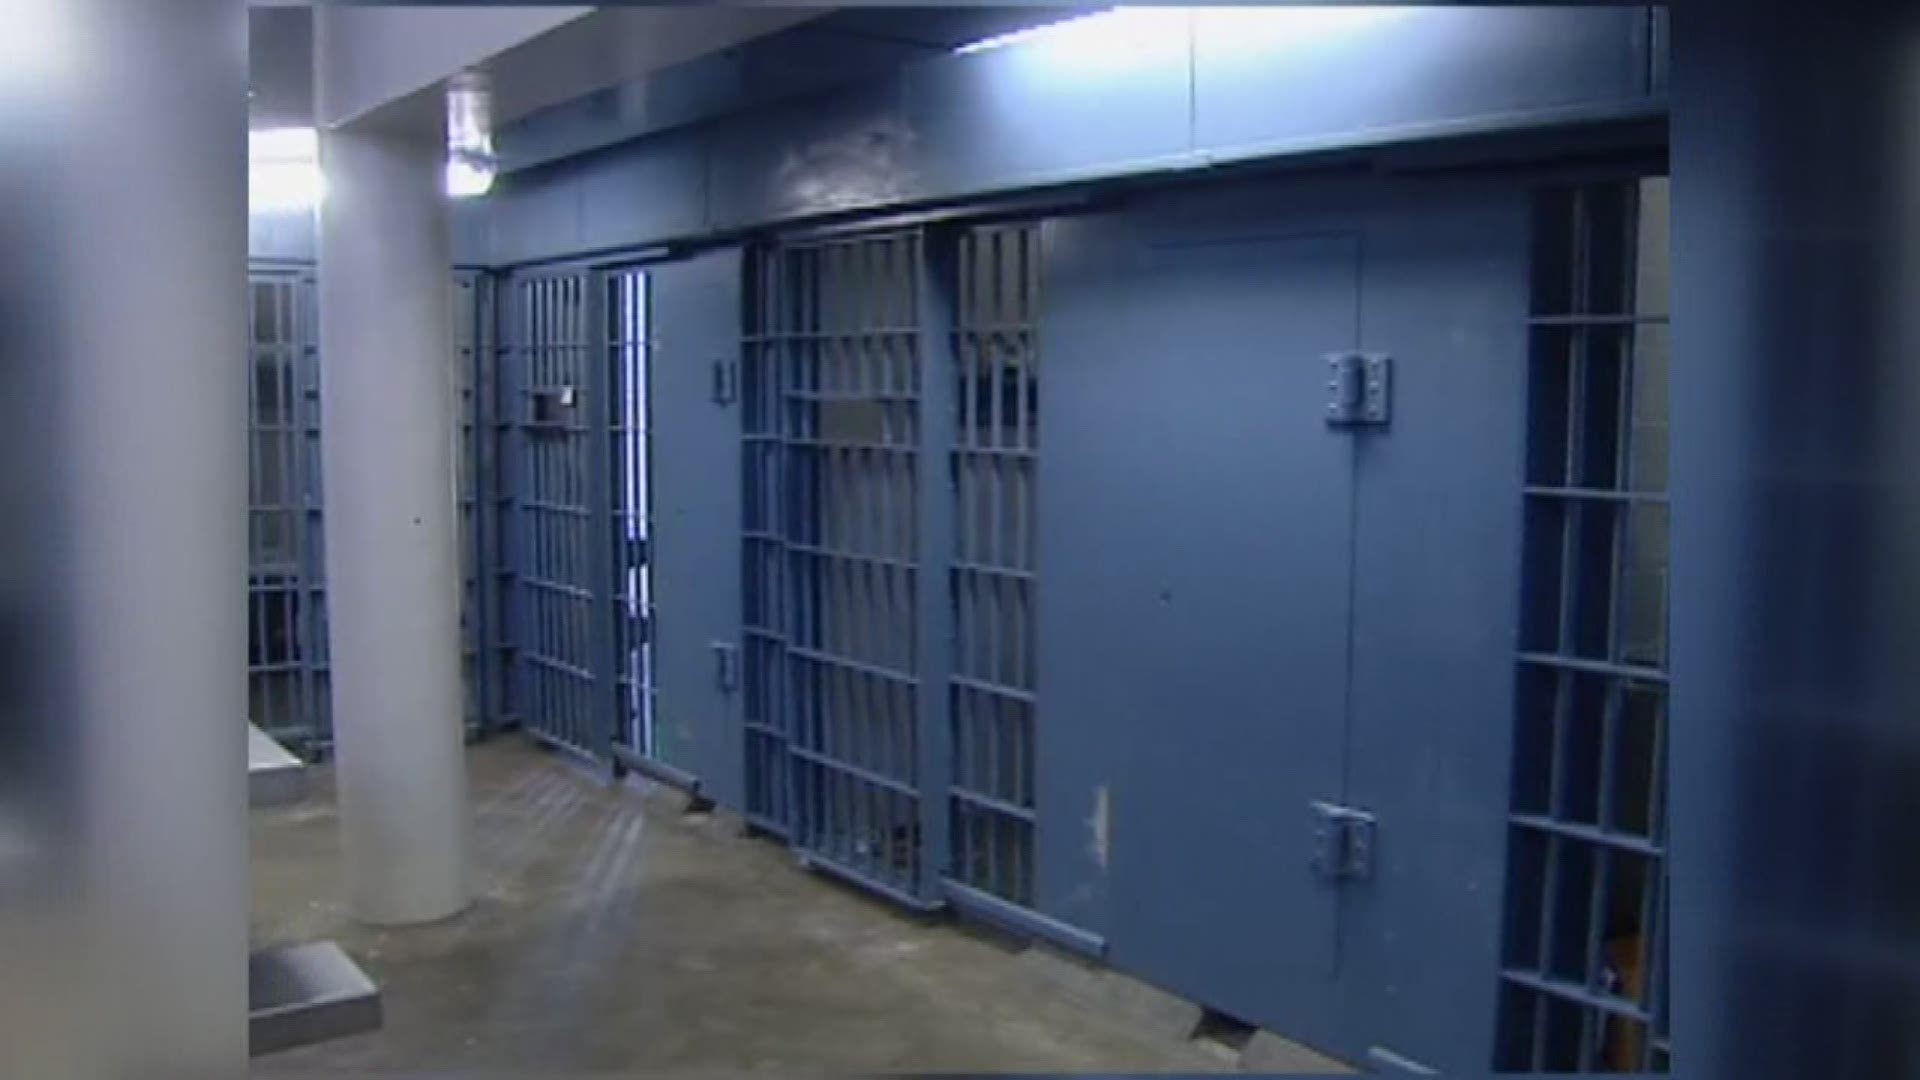 An internal investigation is underway after a jail inmate died within hours of reporting to serve her year-long prison sentence.